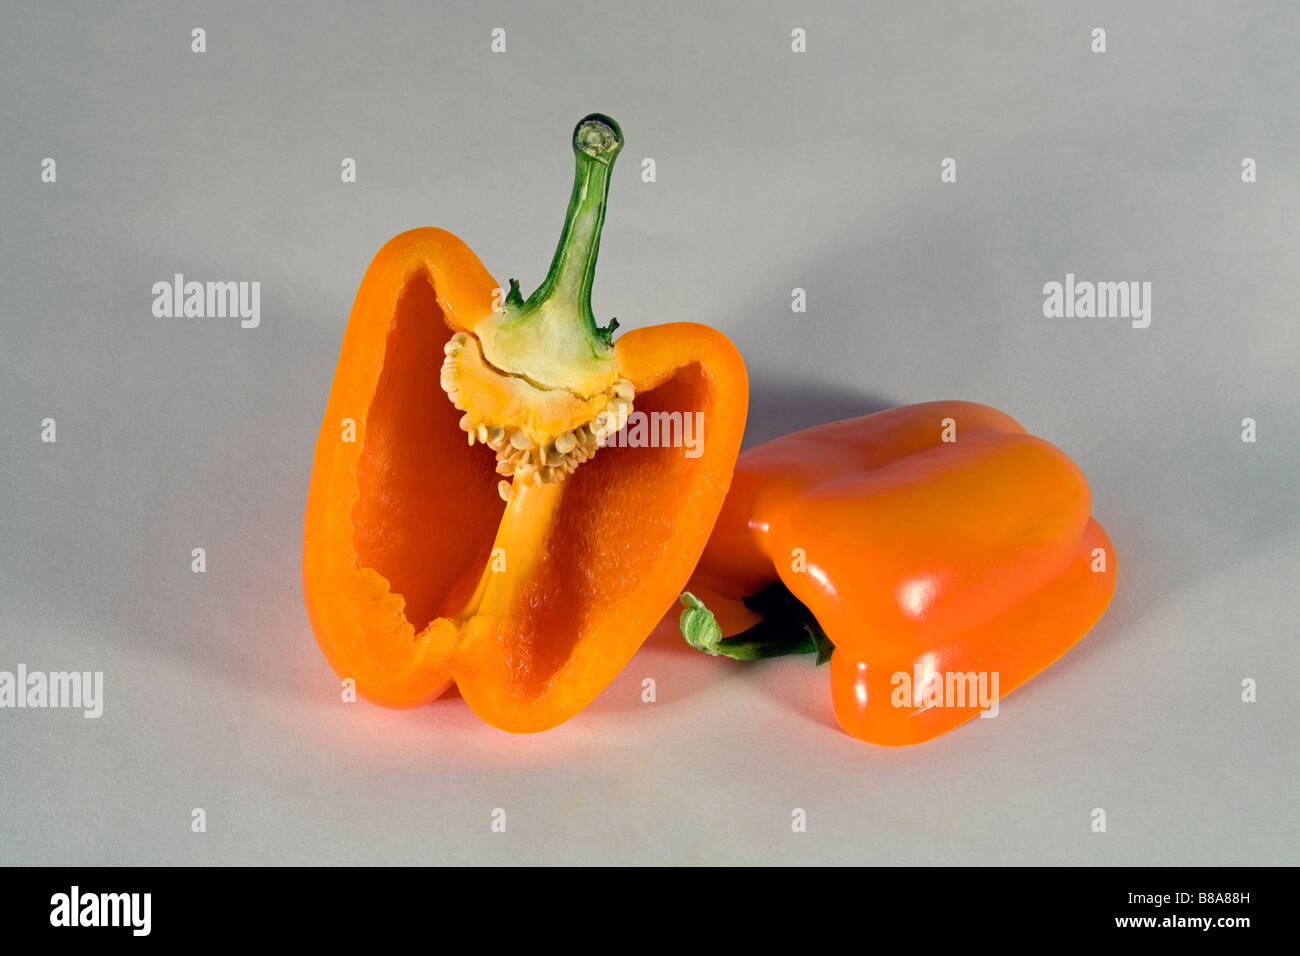 A yellow or orange bell pepper sliced or whole. Stock Photo